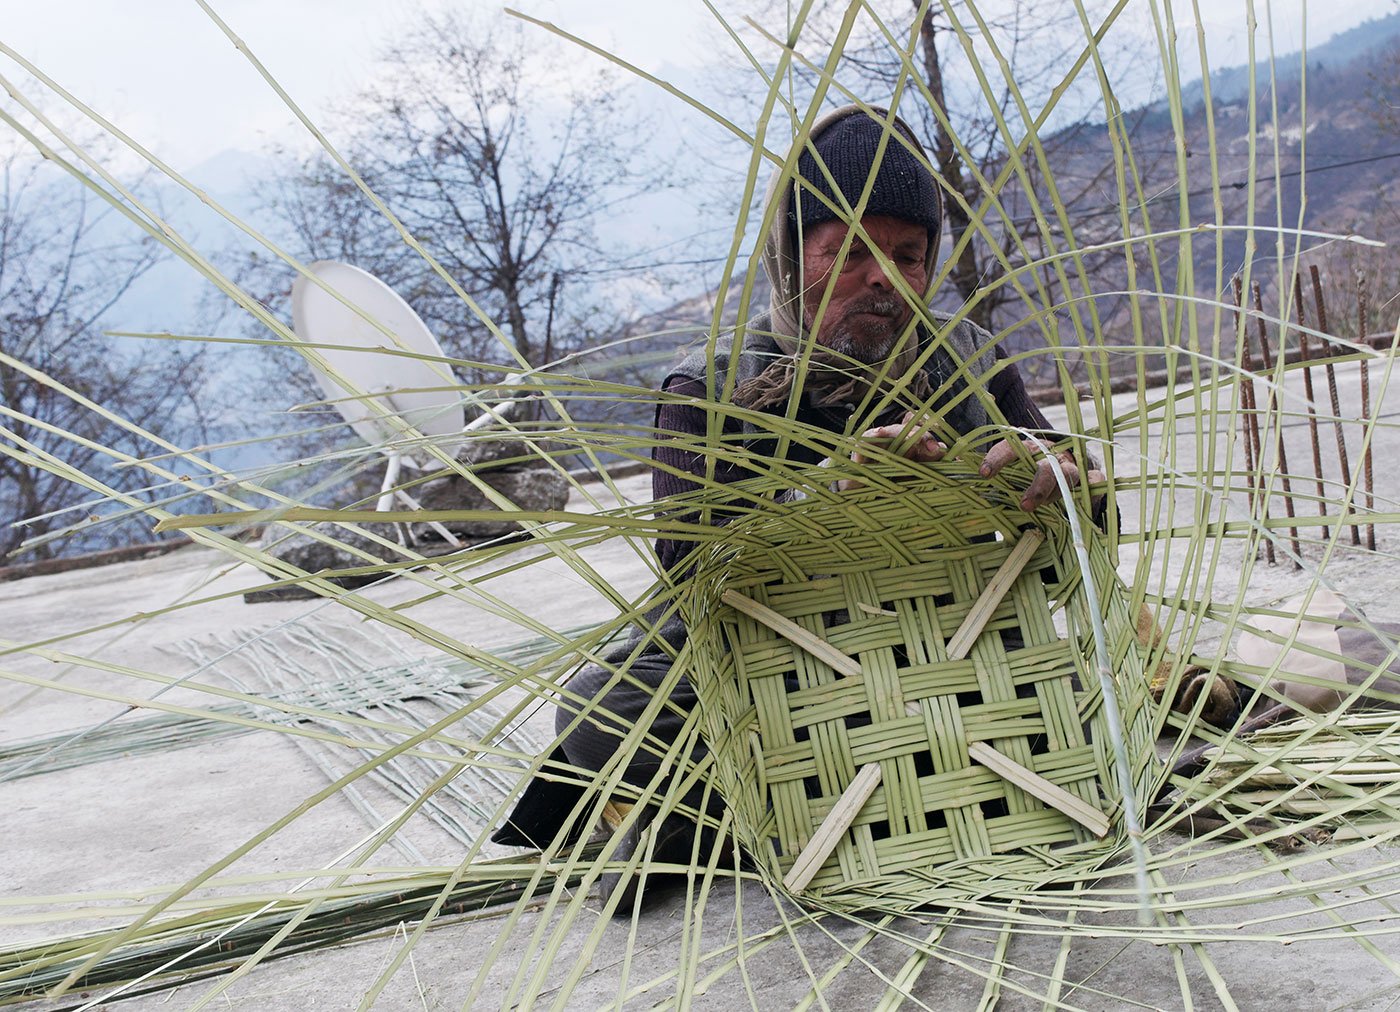 A man sitting on a terrace of a house and weaving bamboo strips into a cylindrical shape